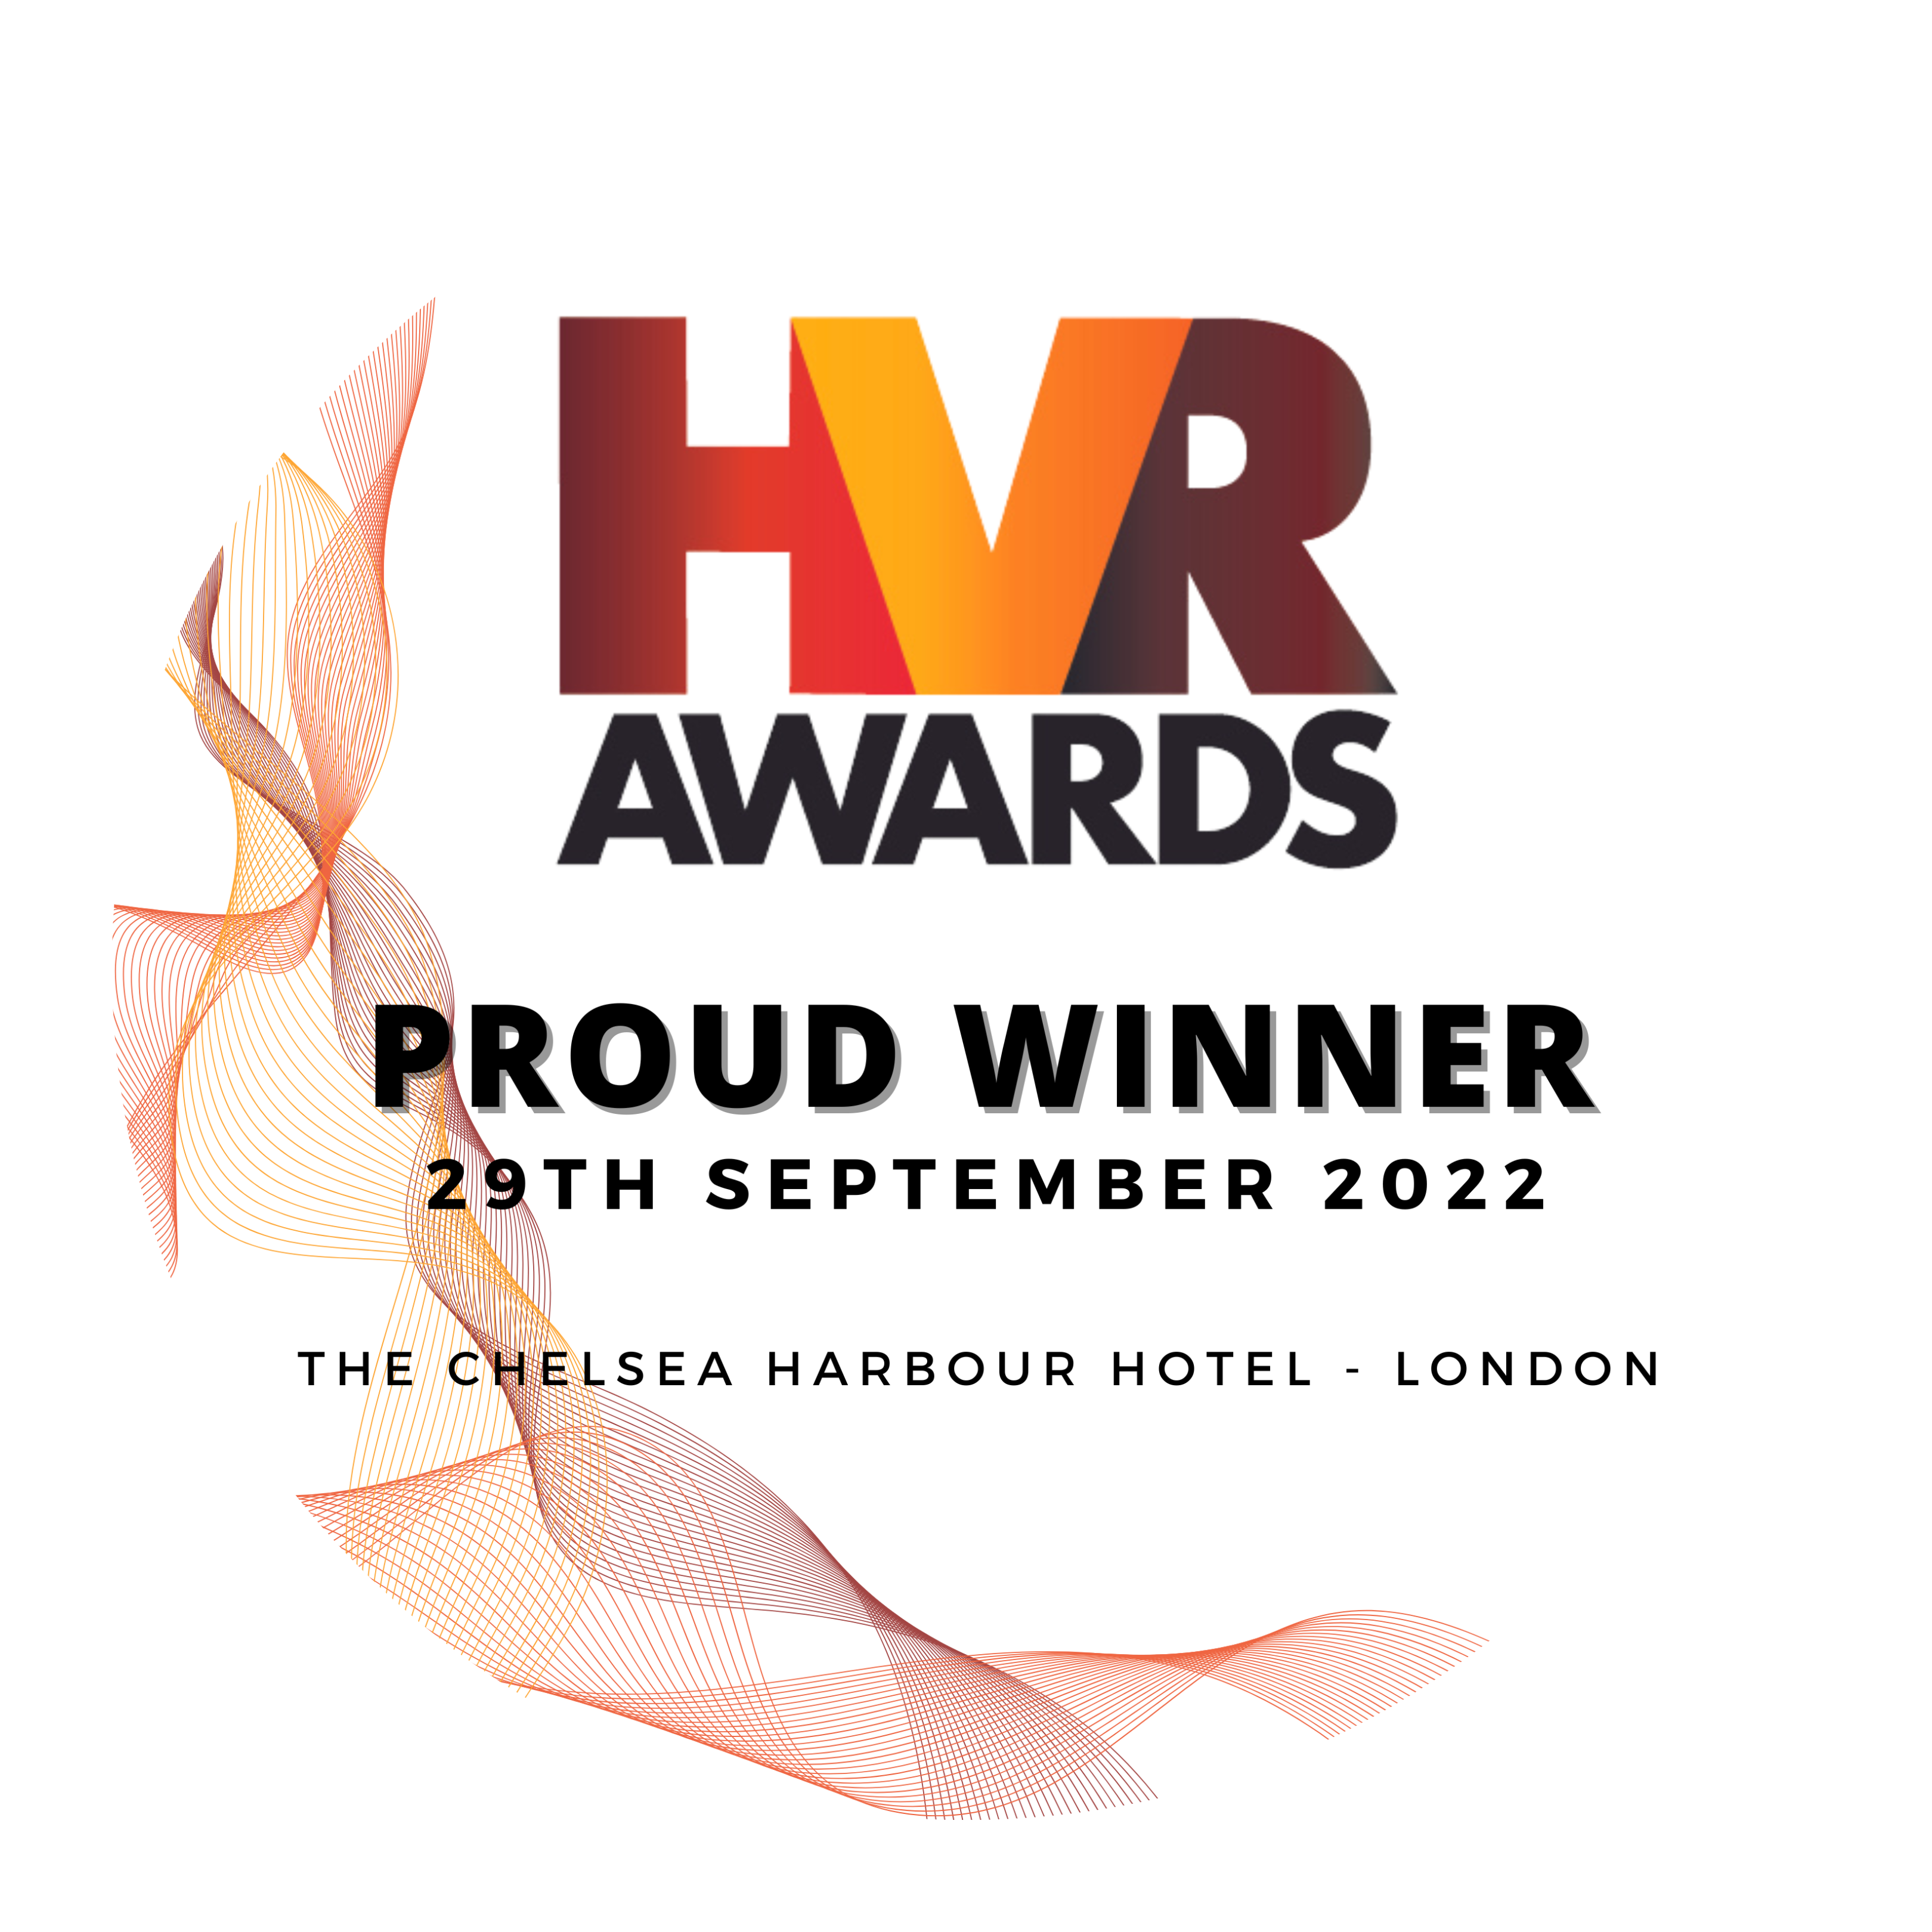 The Power of Working in Collaboration Recognised as Breathing Buildings Wins at HVR Awards